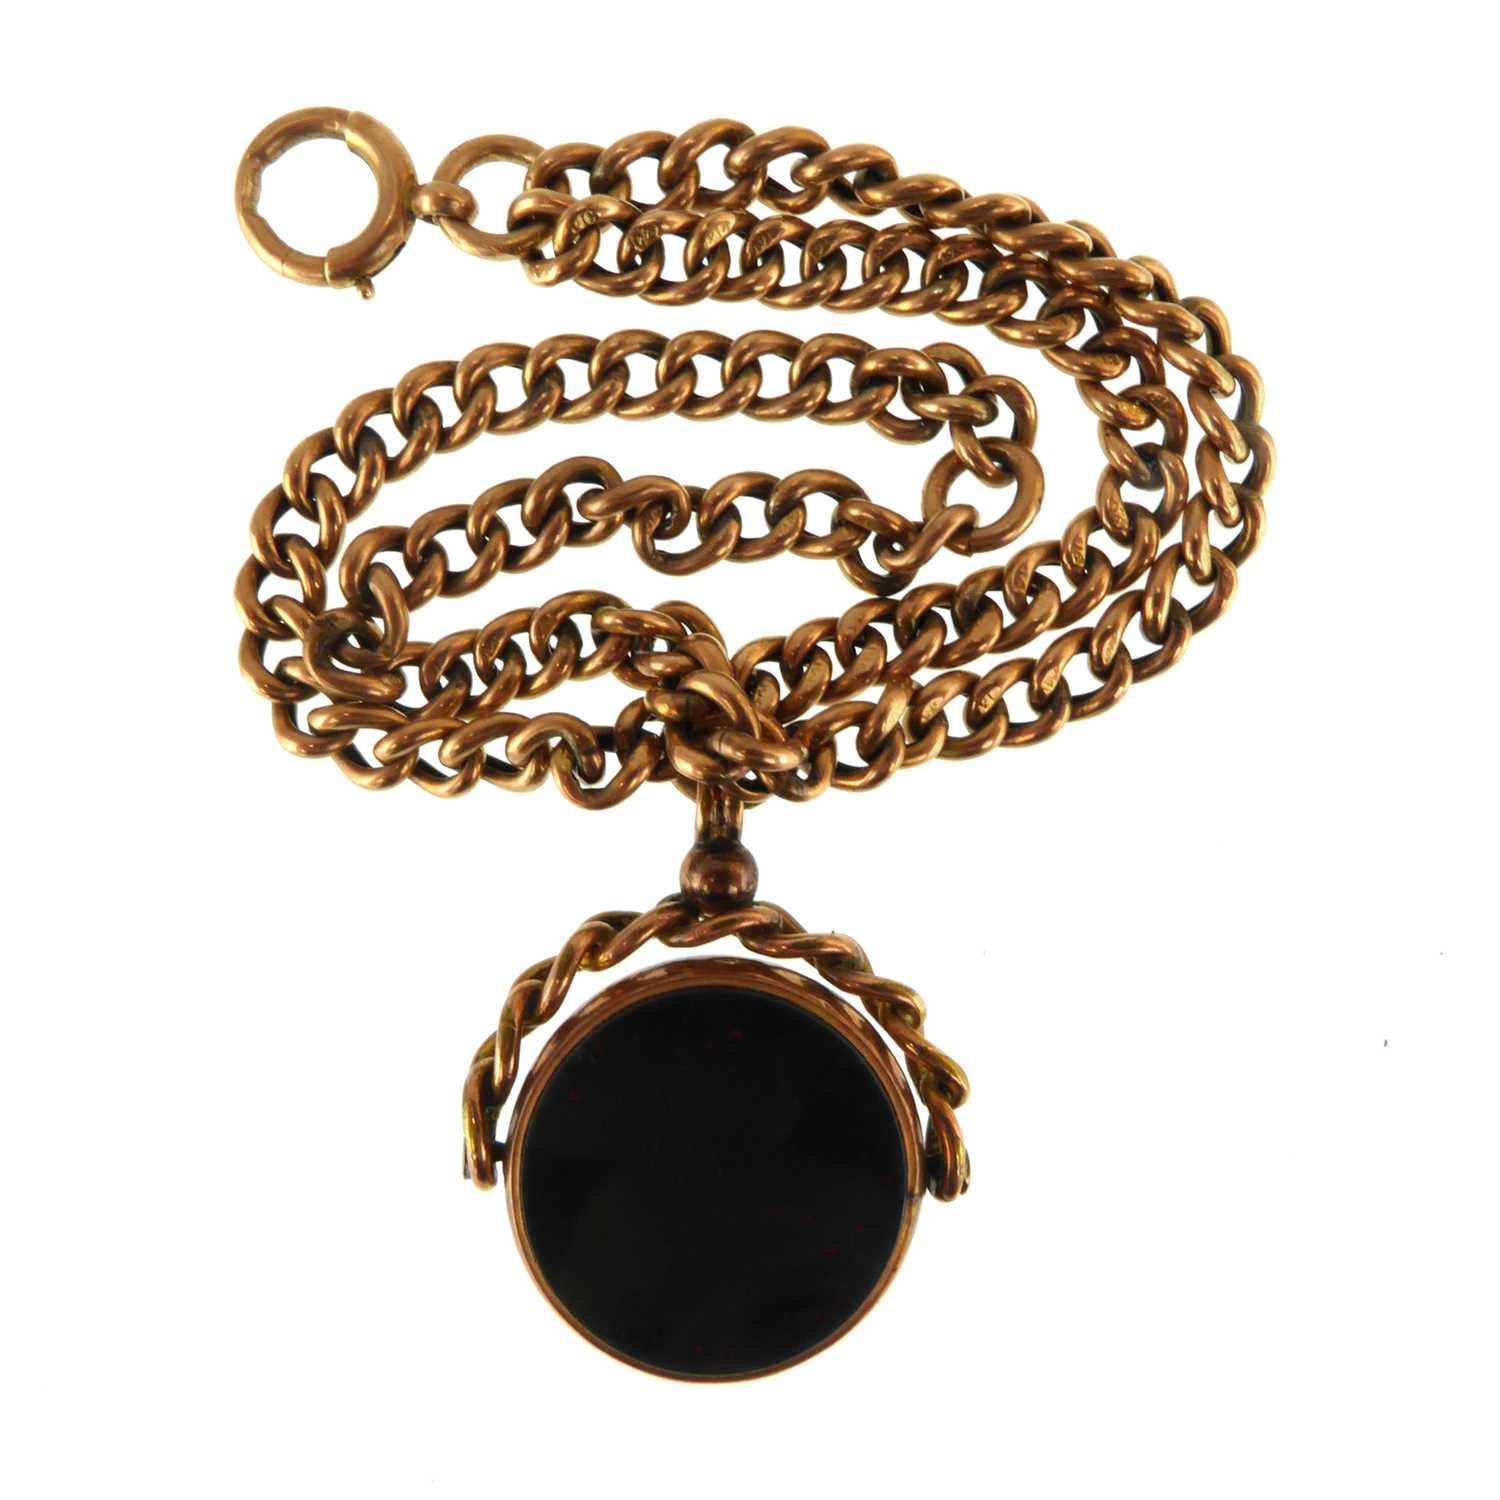 An antique 9ct rose gold double-strand bracelet with goldstone swivel seal fob and ring clasp,